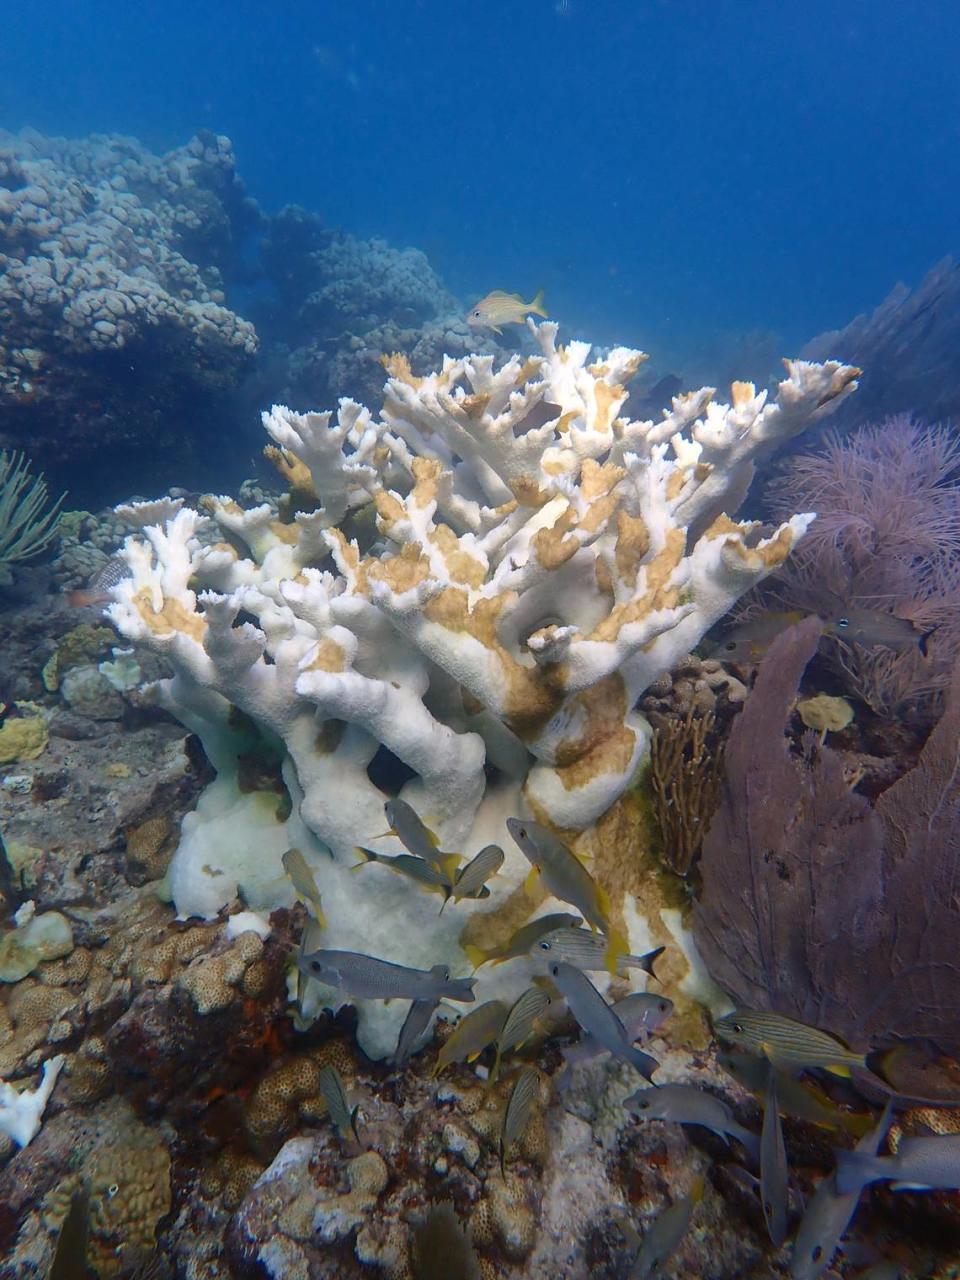 Corals bleached and died in the extreme ocean heat at Sombrero Key in the Florida Keys experienced in the past few weeks.